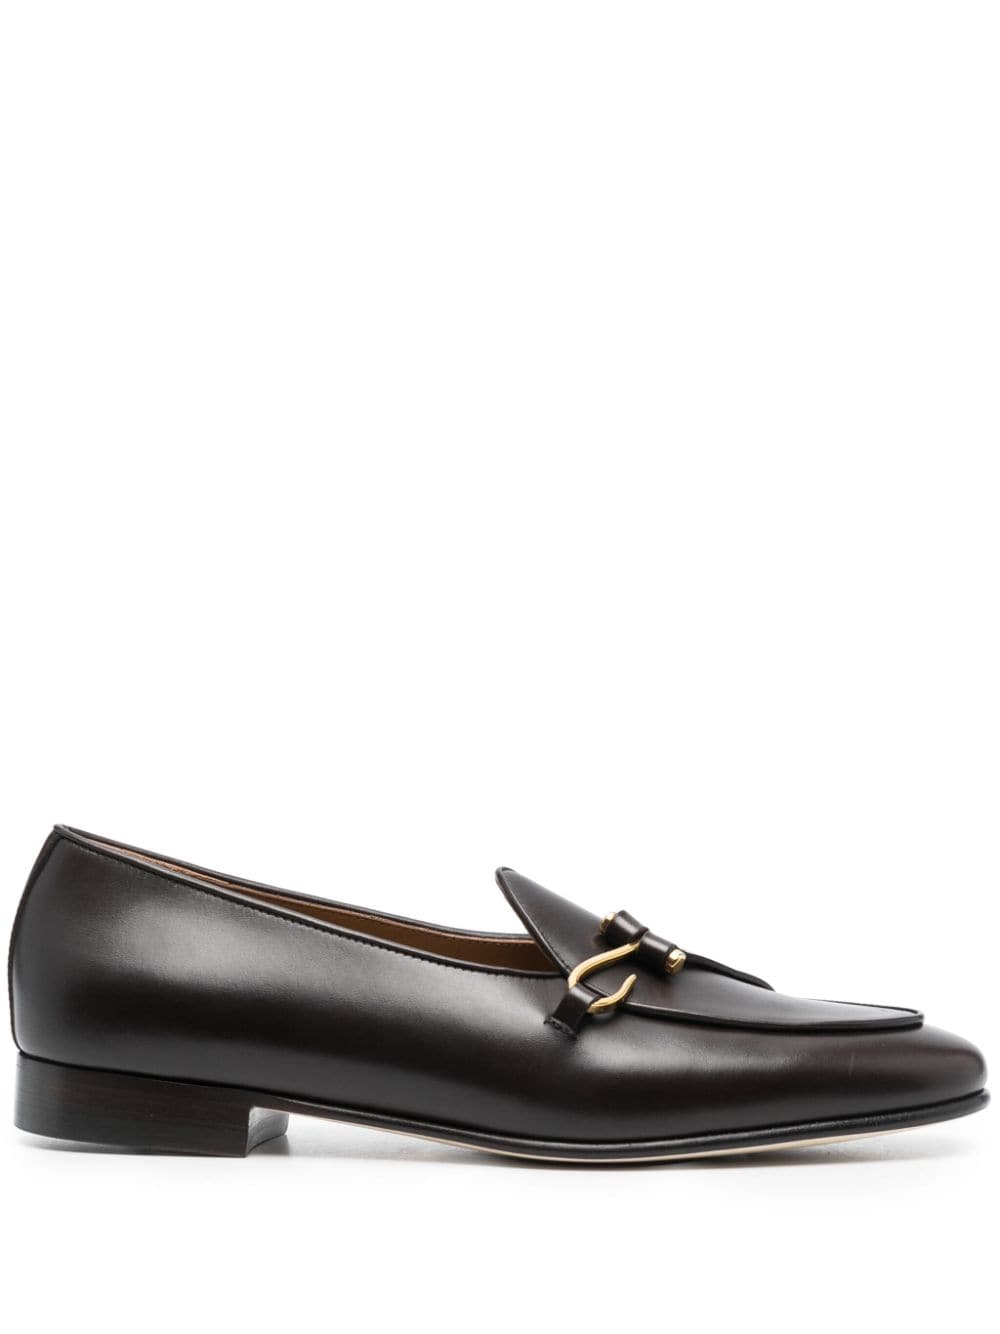 Edhen Milano Comporta leather loafers